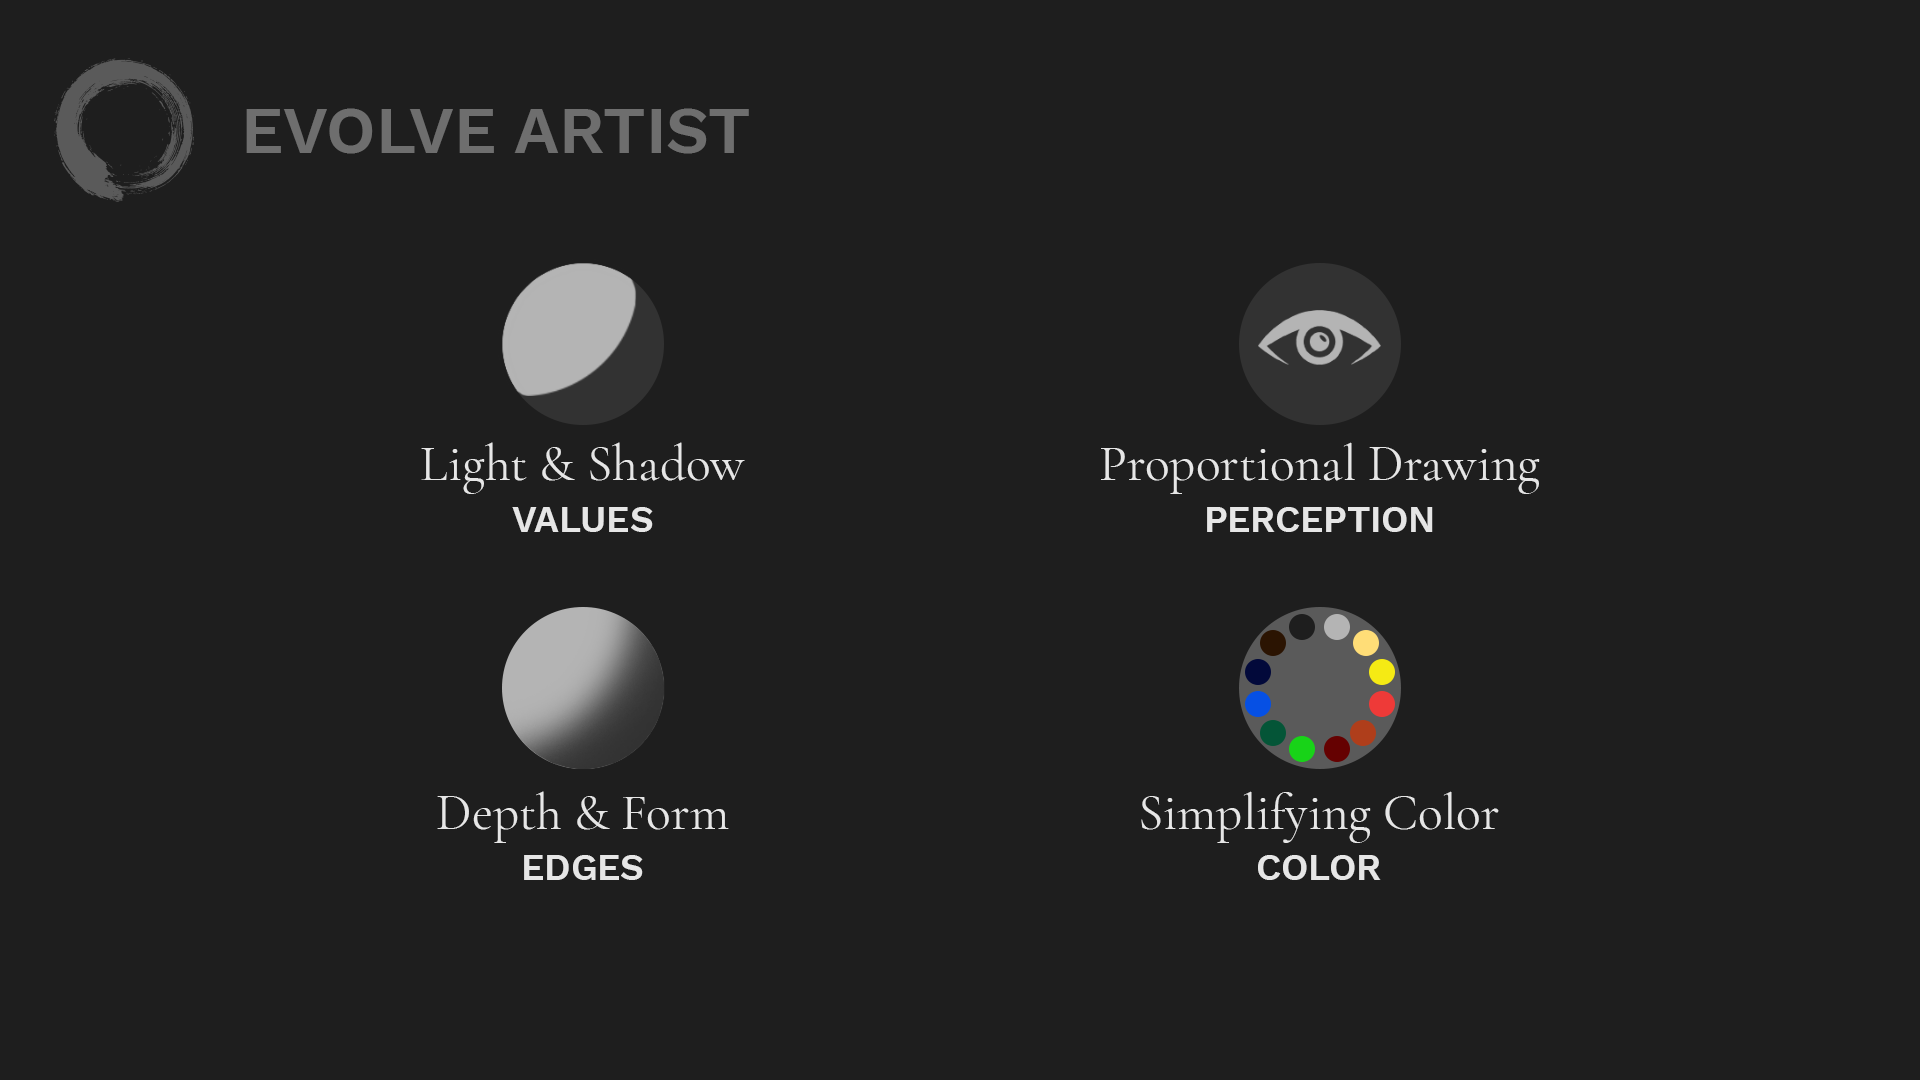 How to Simplify Color is the fourth fundamental of art.